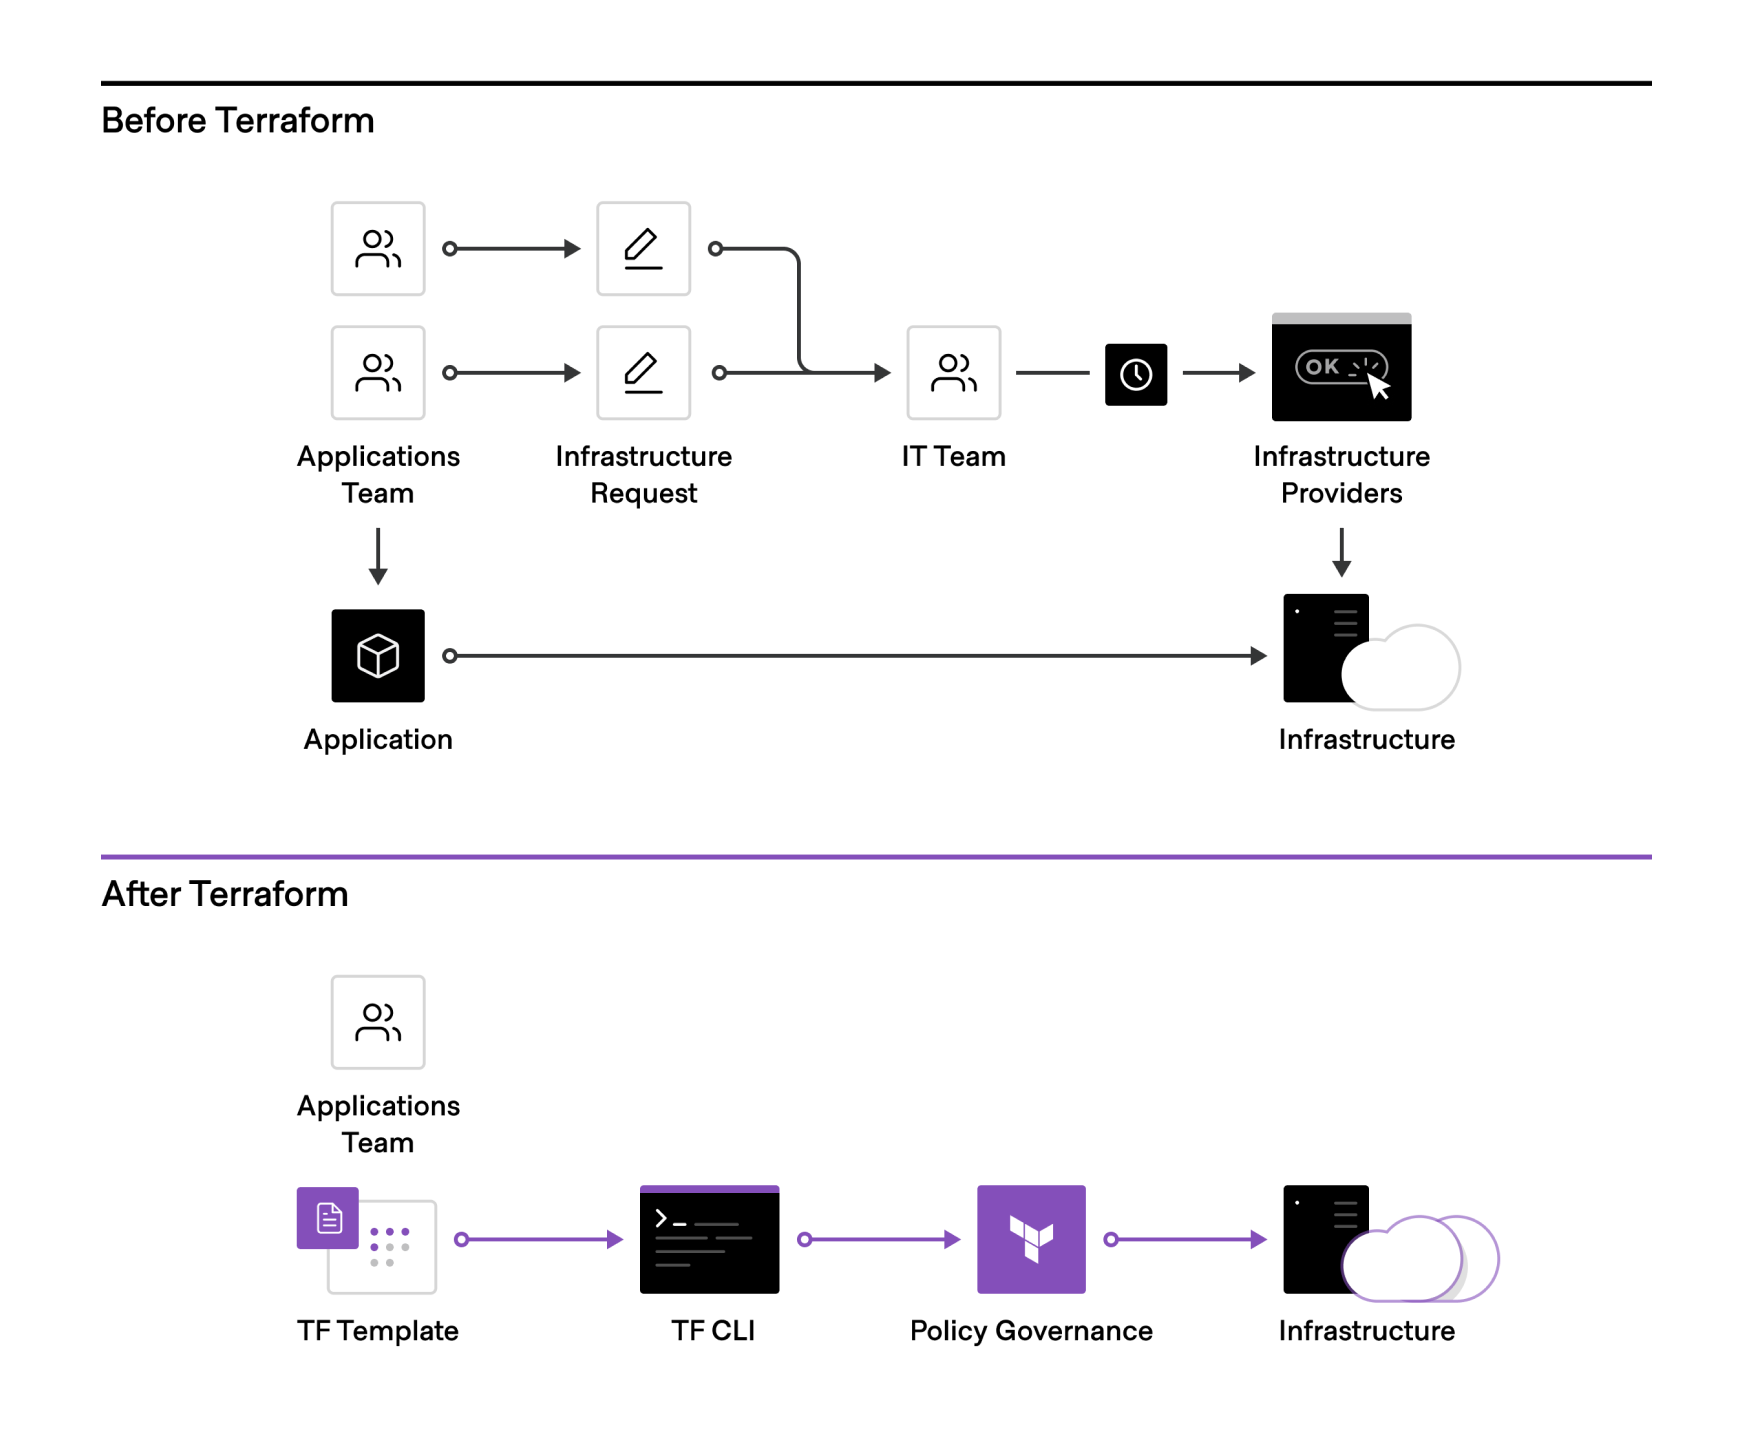 <em>Without an automated provisioning workflow, requests for resources must be reviewed and approved manually. With HashiCorp Terraform, platform teams can automatically route all requests through pre-approved templates to deliver on-demand access to infrastructure for application teams.</em>